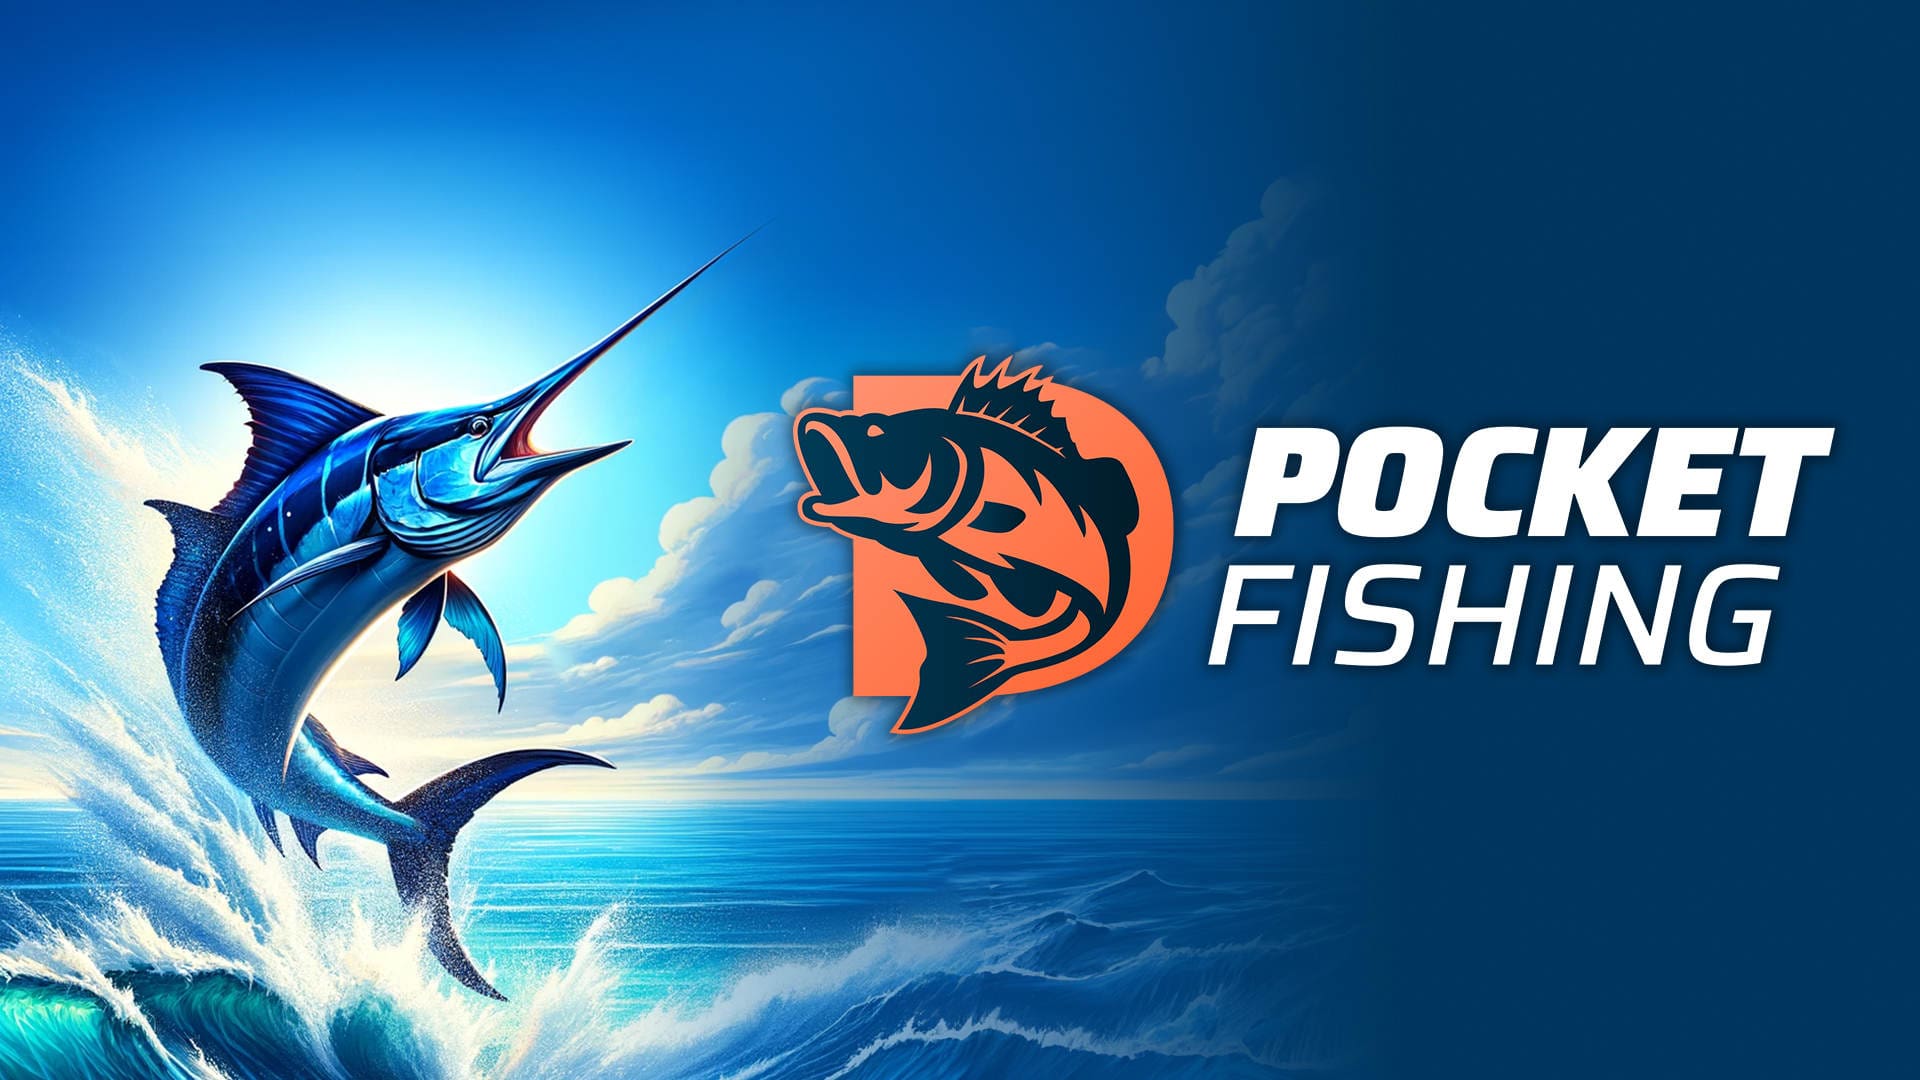 Pocket Fishing now available on Switch - Video Game News